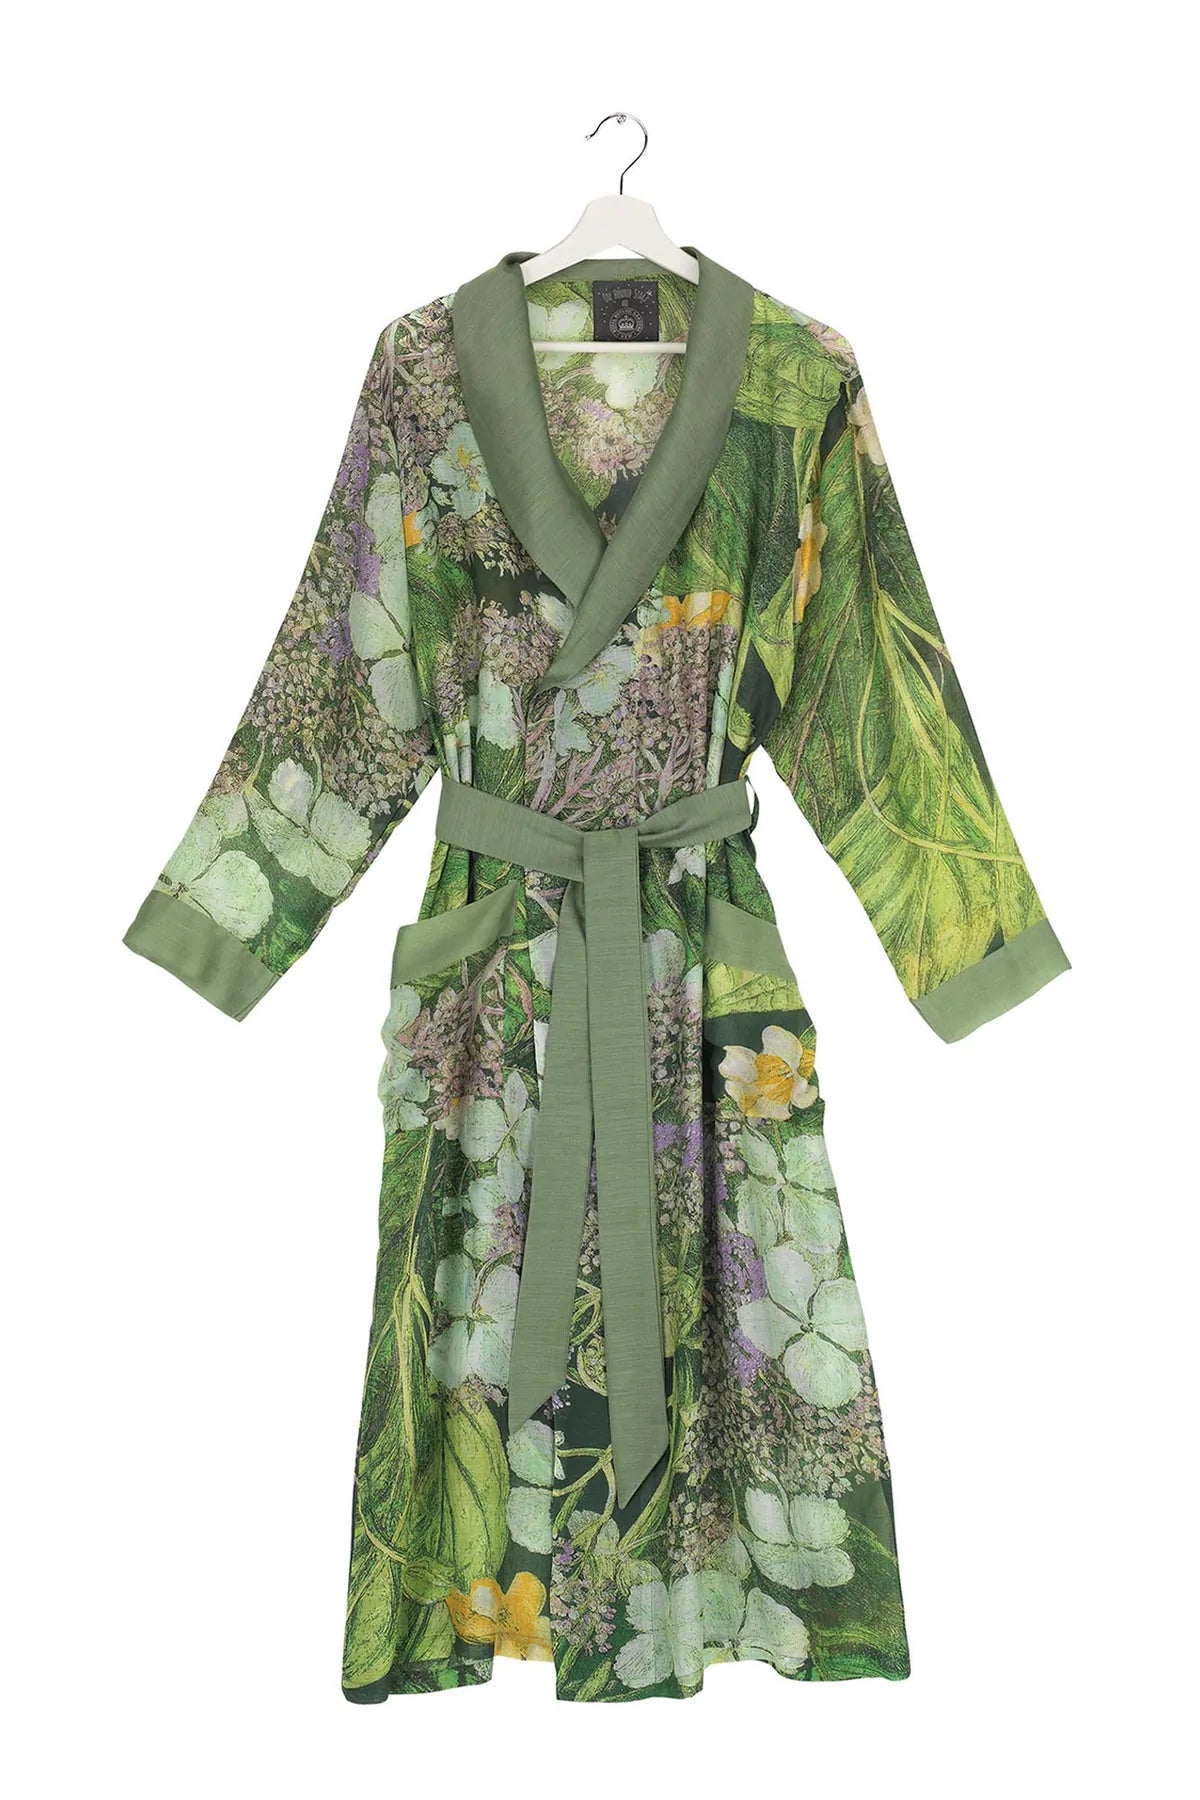 Marianne North Hydrangea Lime Green Gown